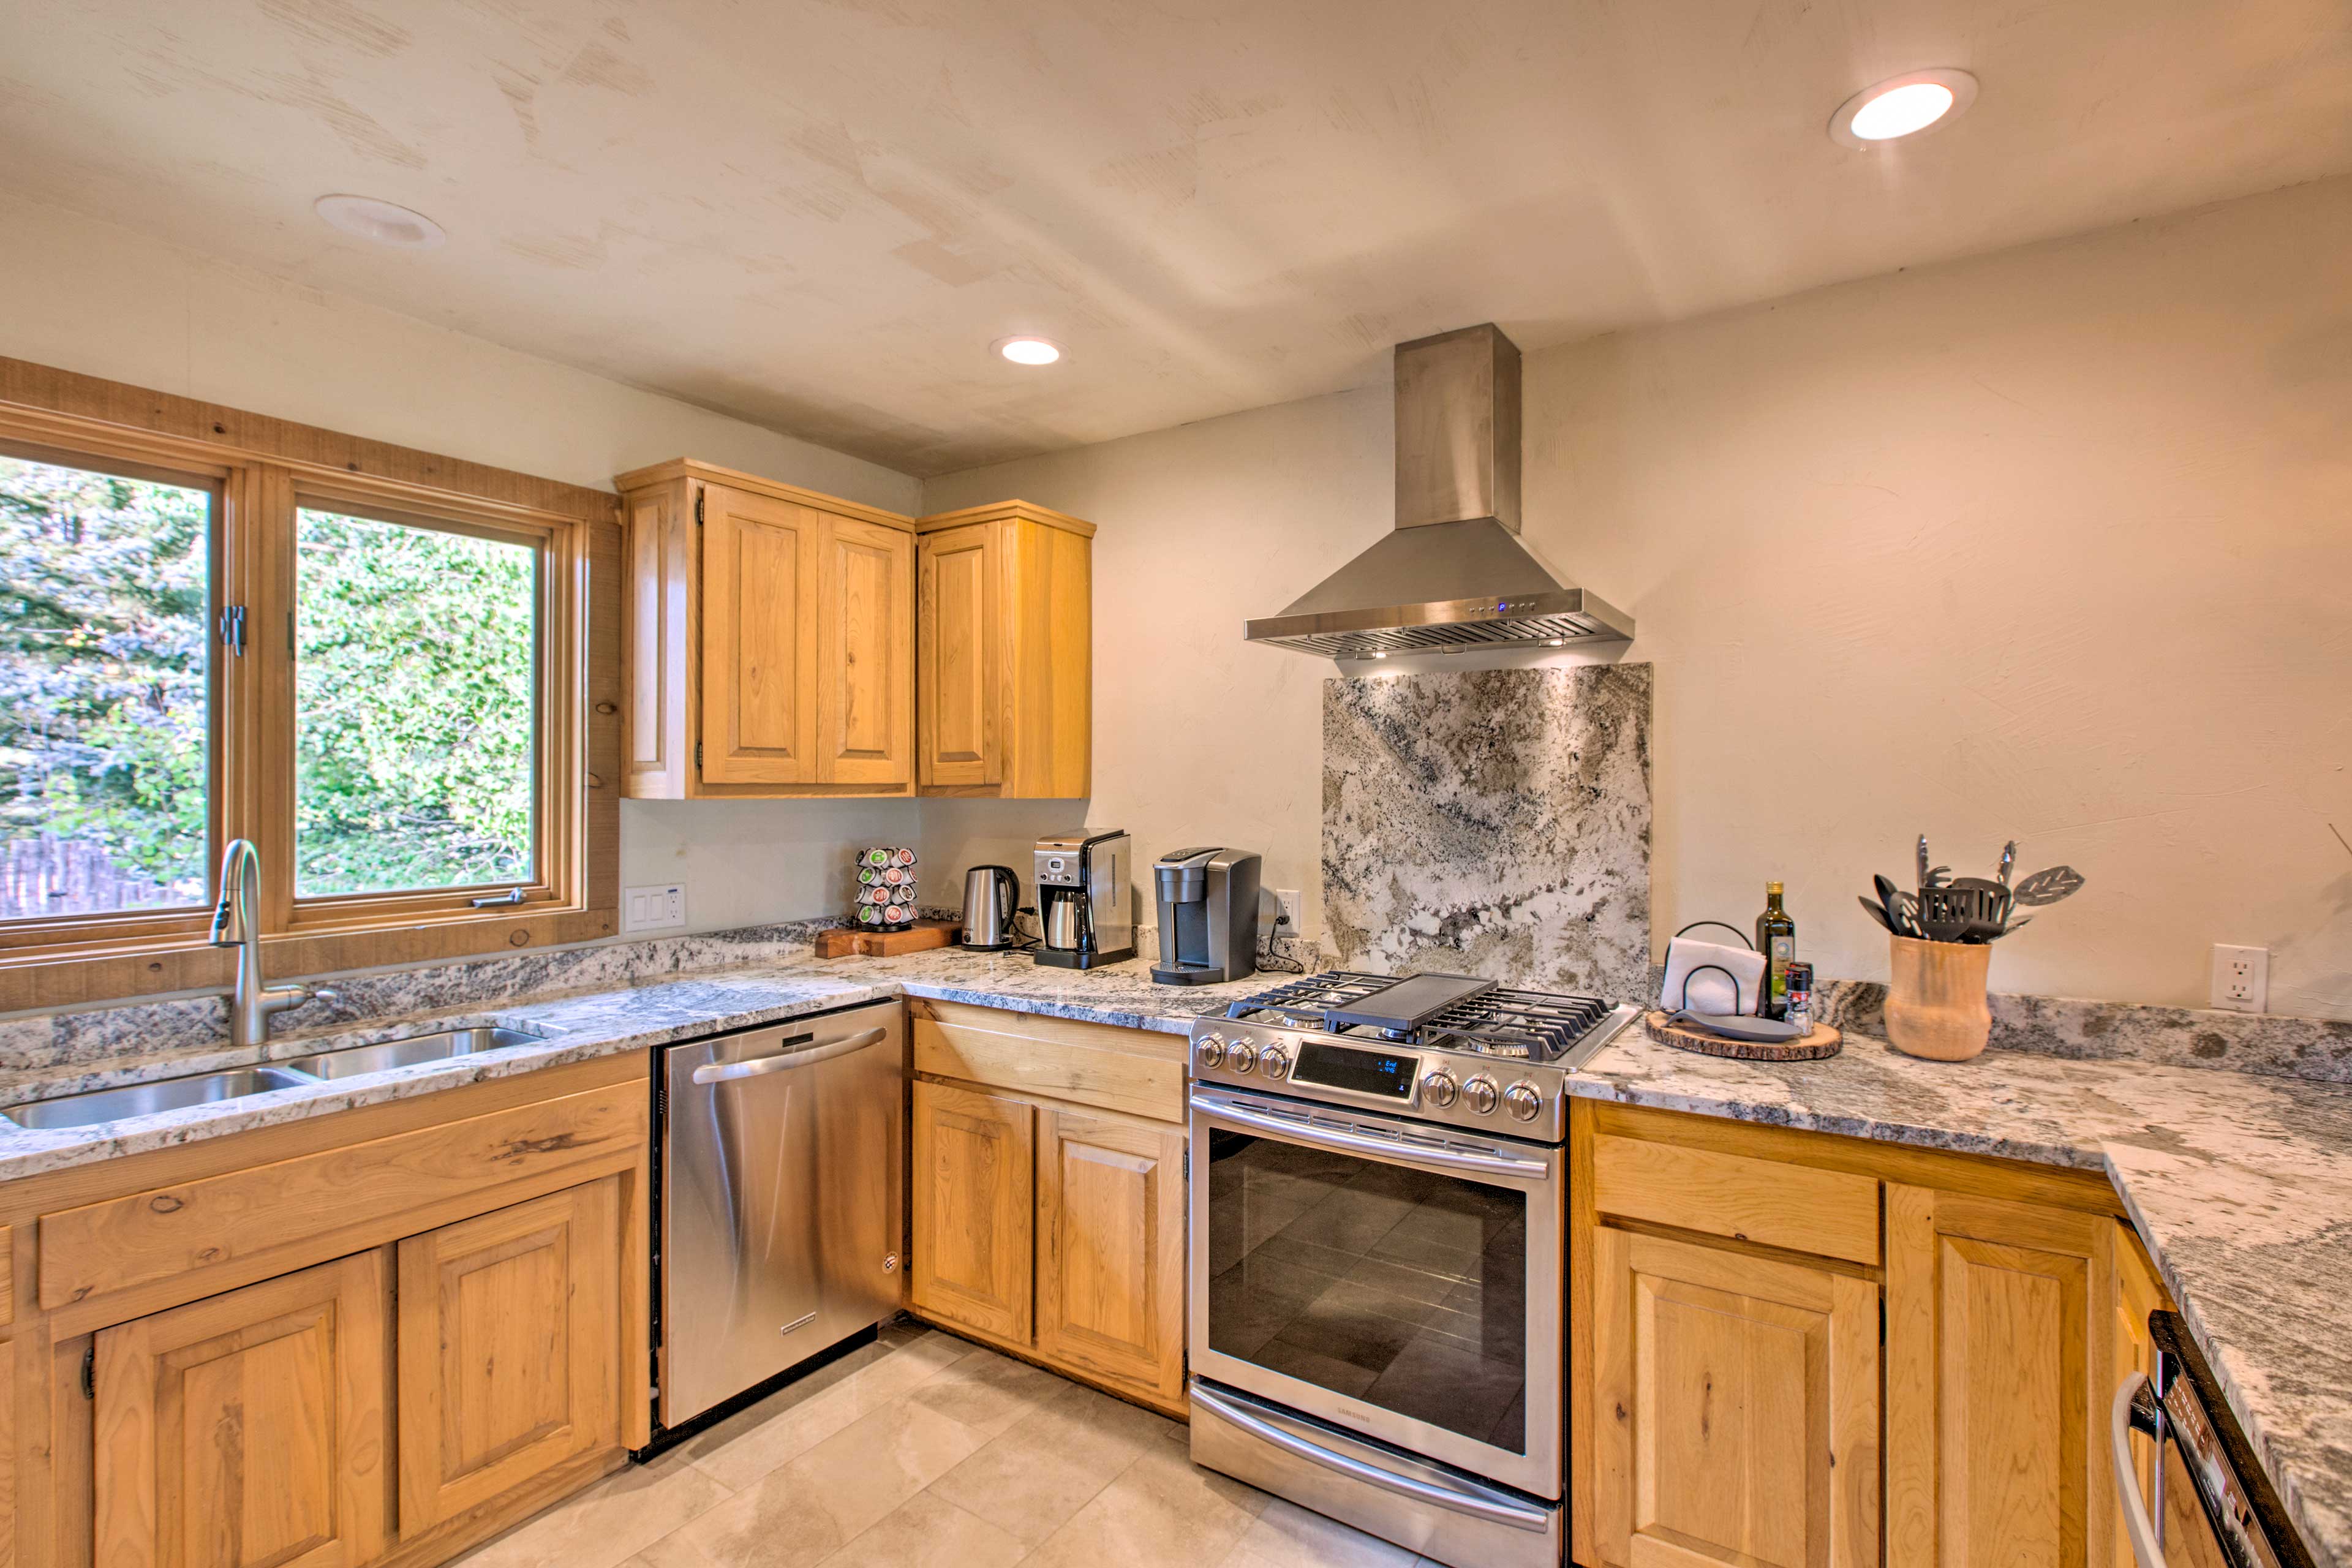 Kitchen | Fully Equipped | Stainless Steel Appliances